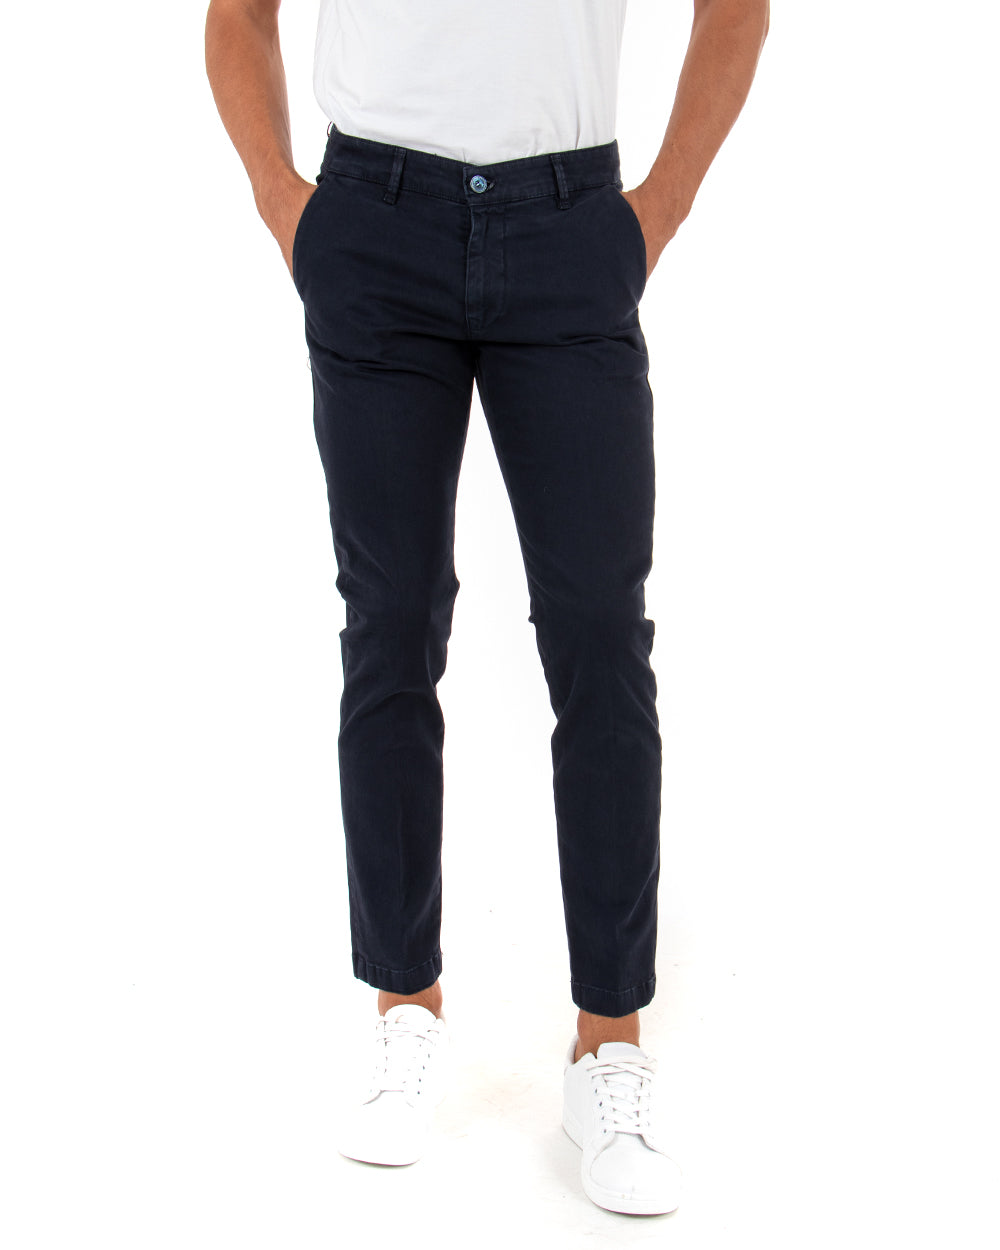 Classic Men's Solid Color Long Casual Trousers Basic Blue GIOSAL